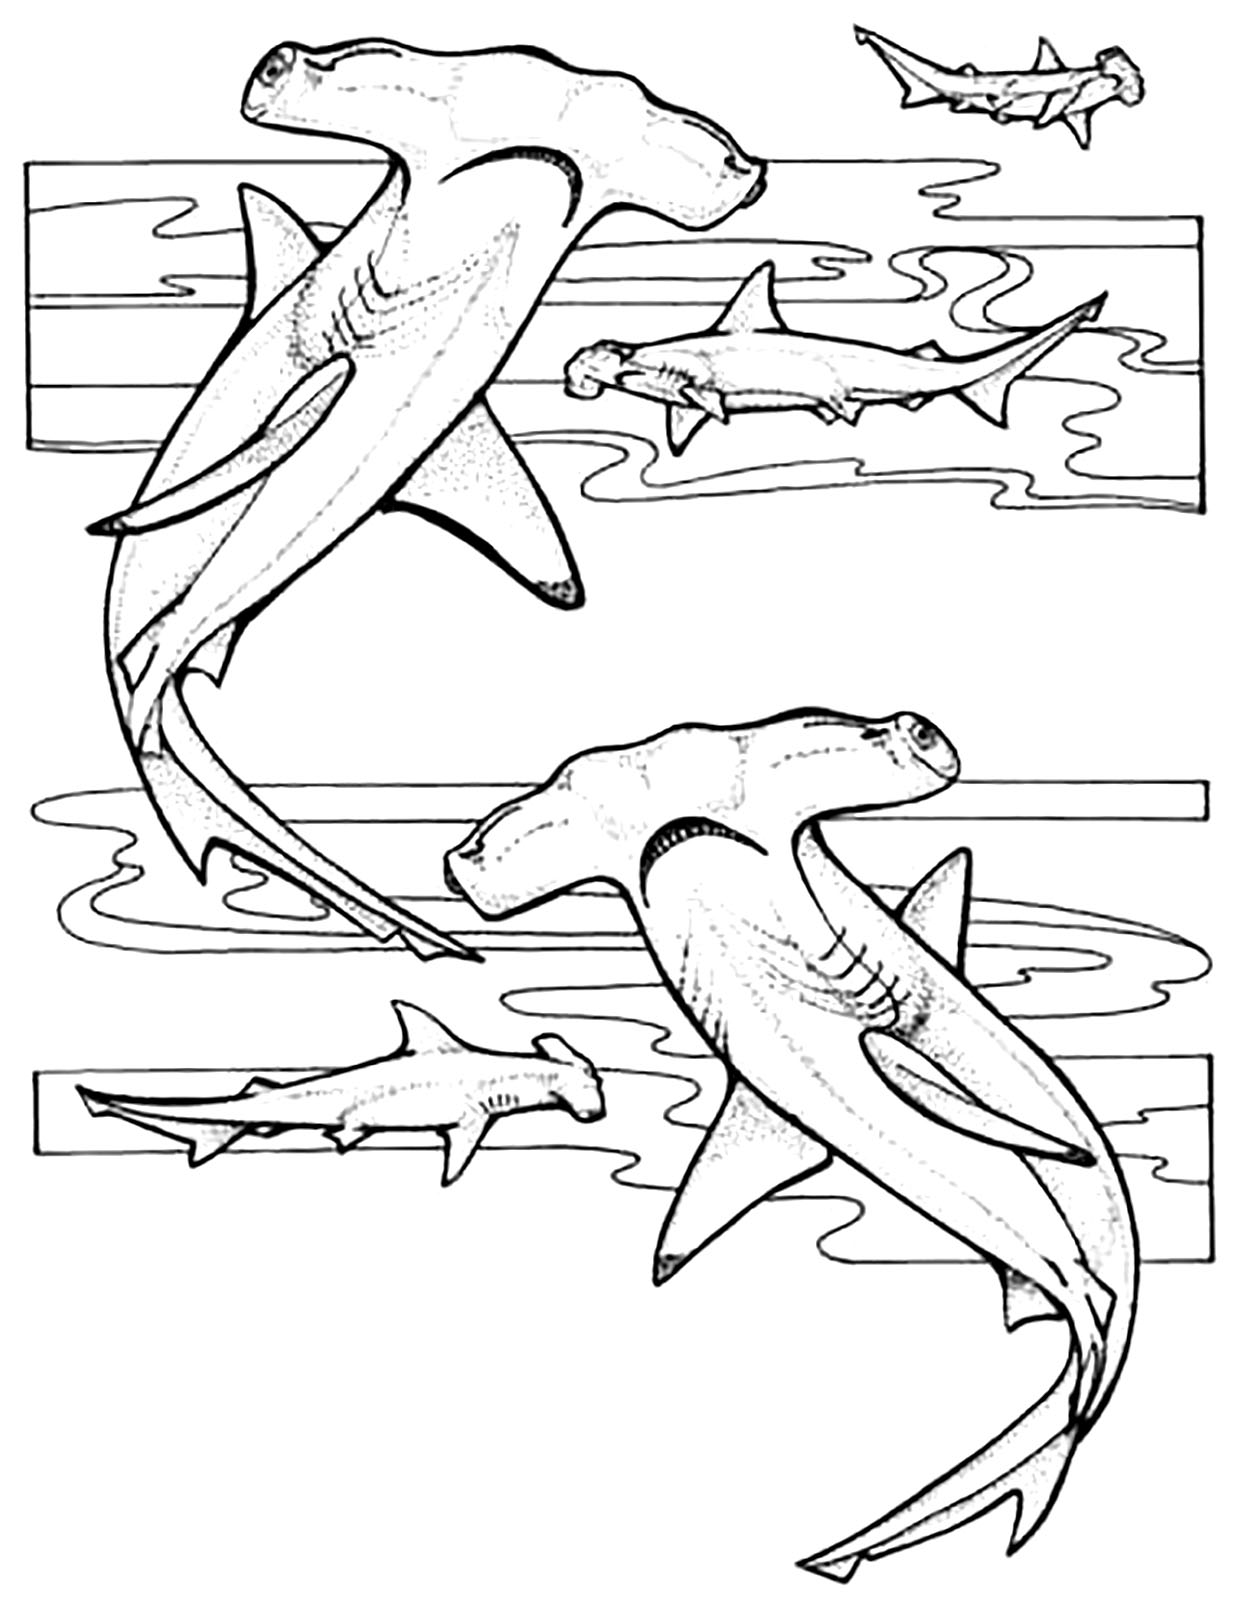 Sharks free to color for children - Sharks Kids Coloring Pages